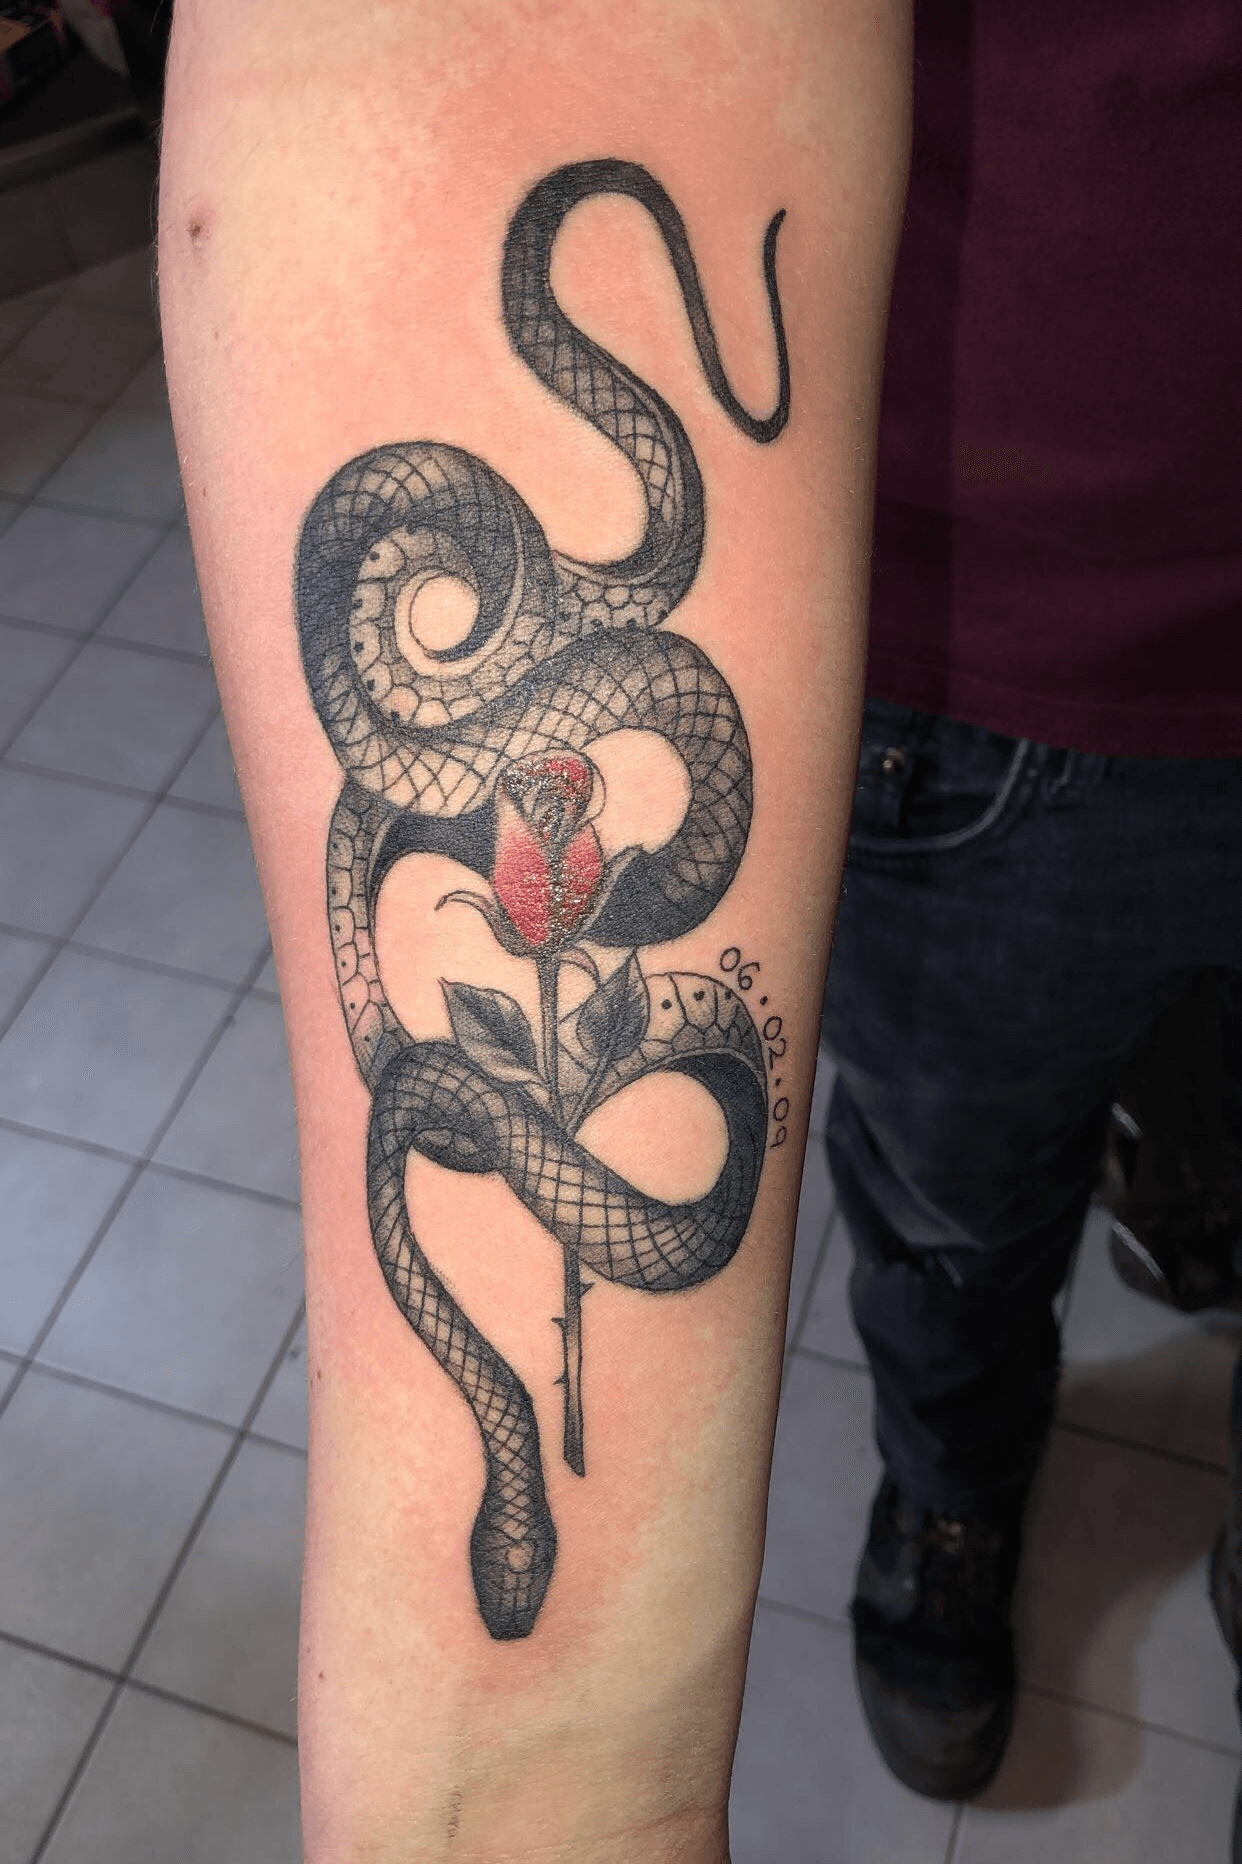 Tattoo uploaded by Dominik Latawiec • Tattoo with a catholic meaning. Snake represents Adam & Eve and the flower is the garden of Eden • Tattoodo